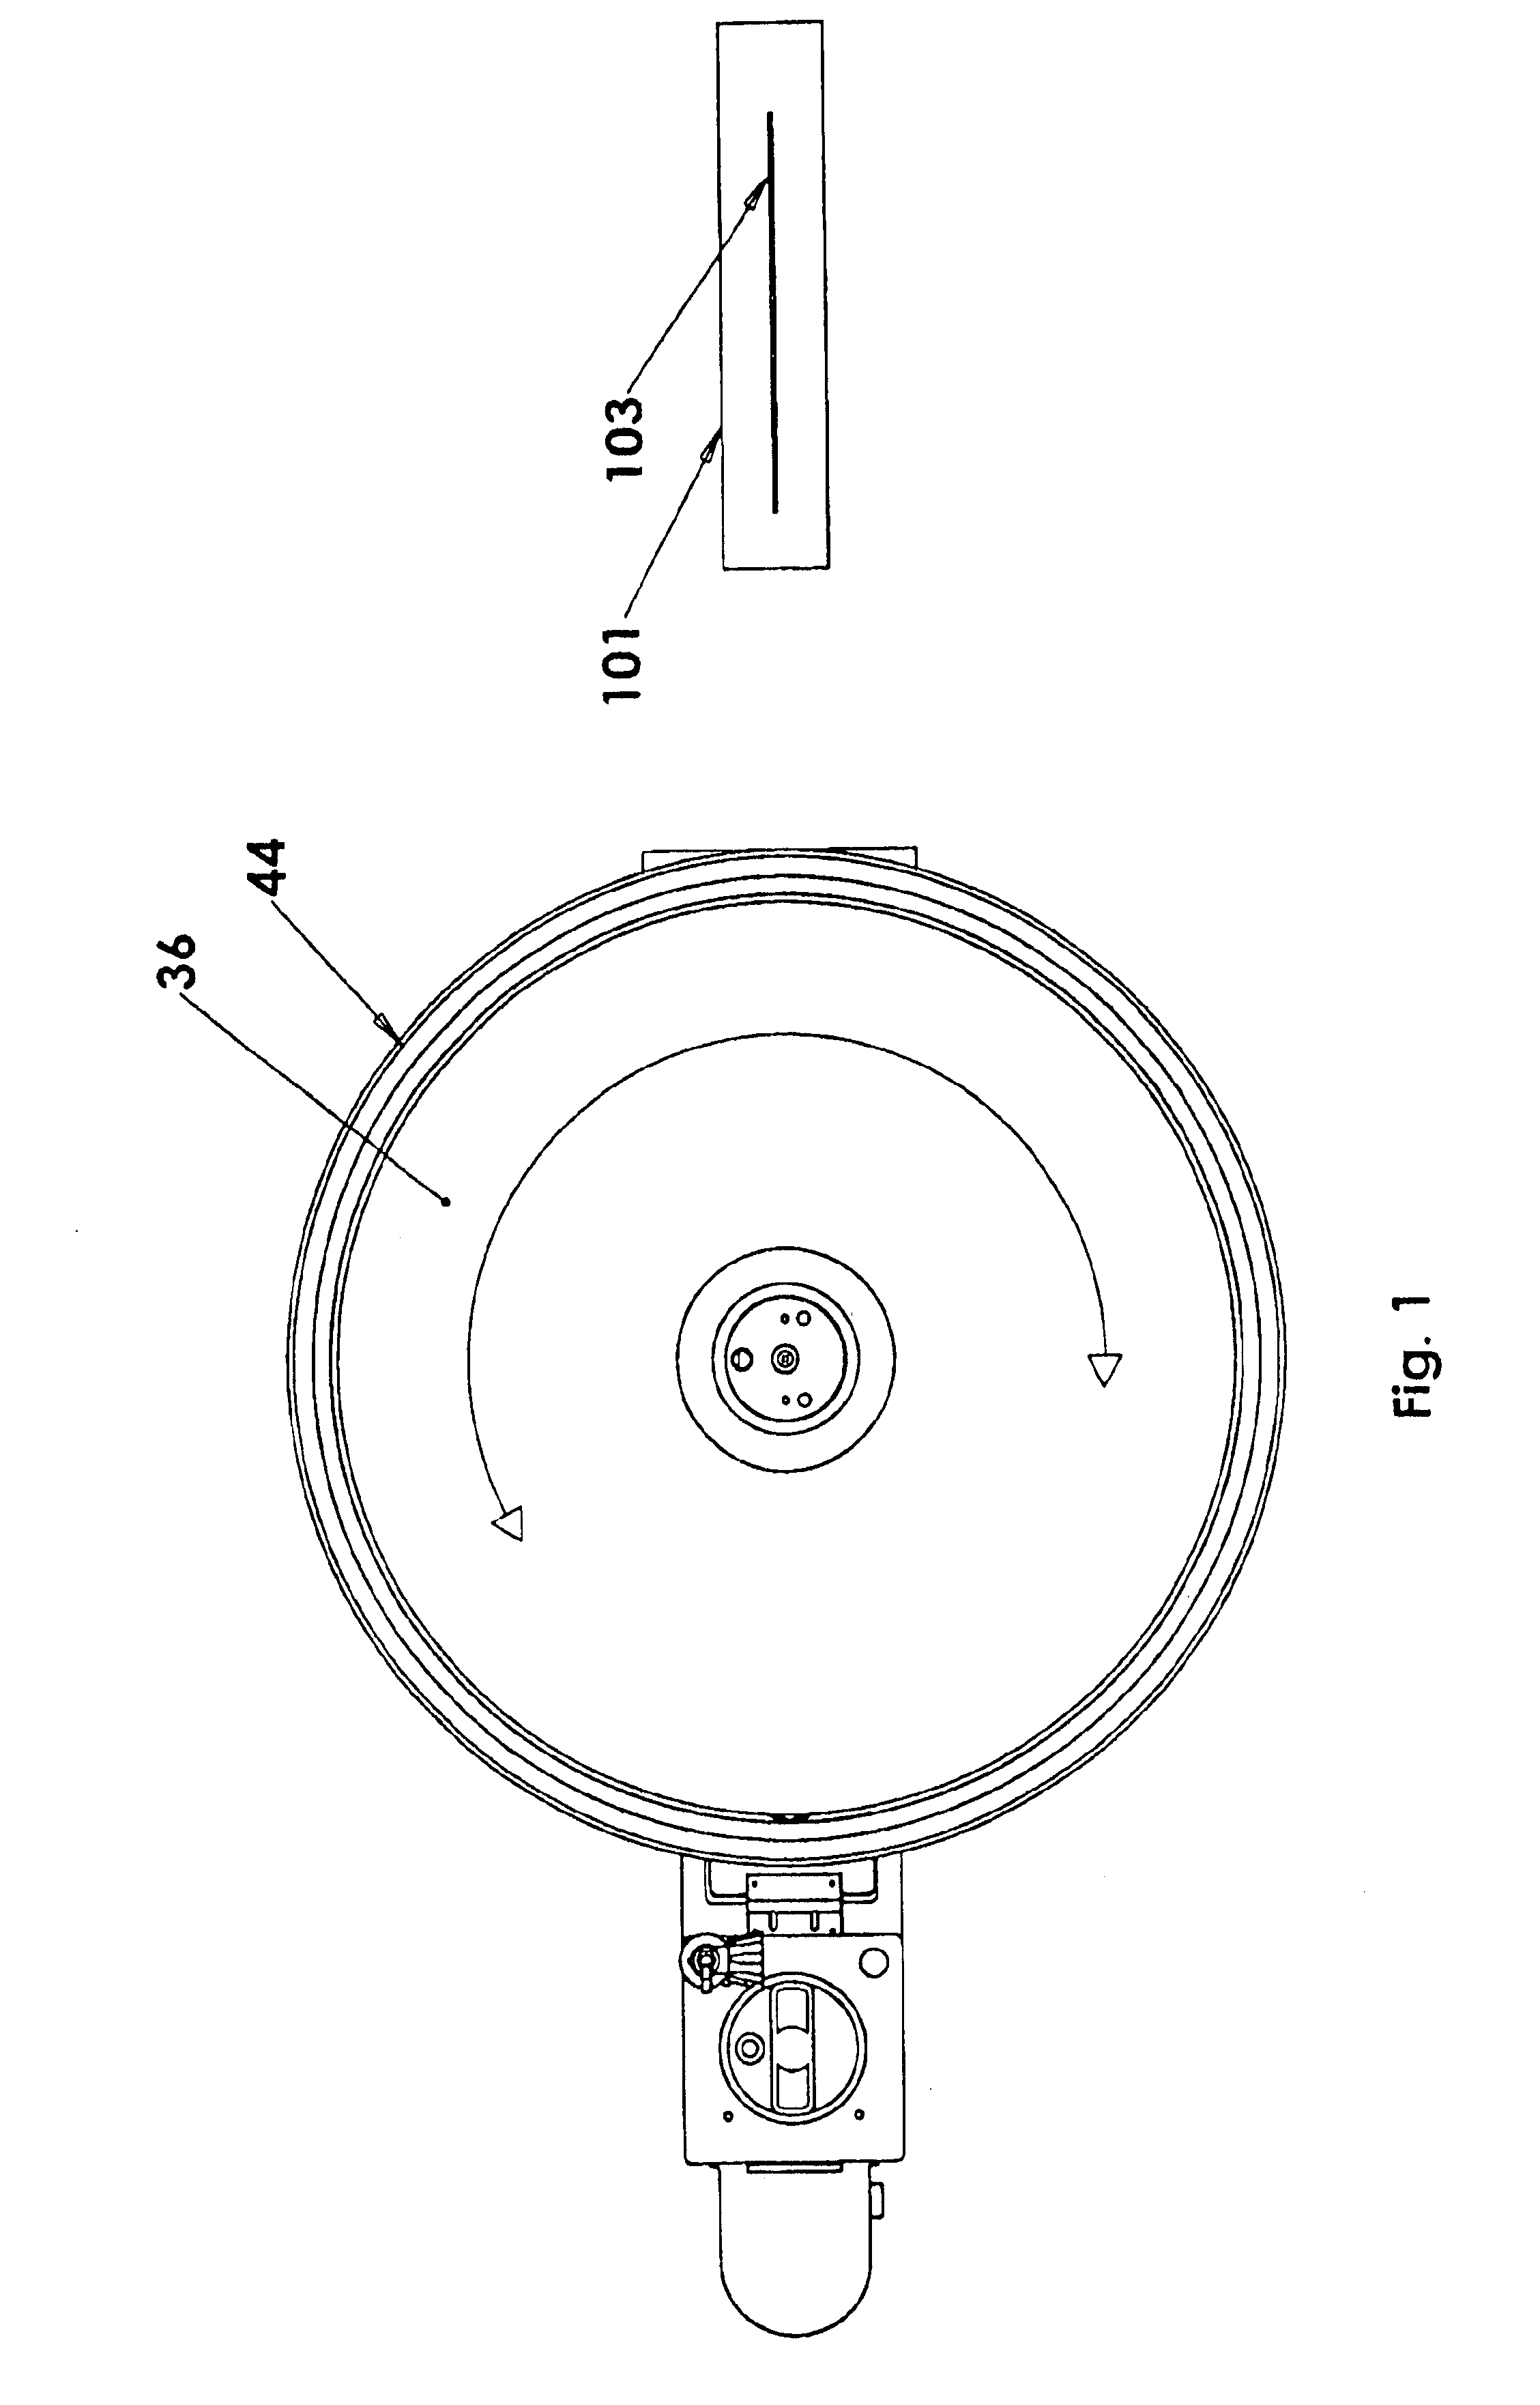 Electrodeposition apparatus and method using magnetic assistance and rotary cathode for ferrous and magnetic particles